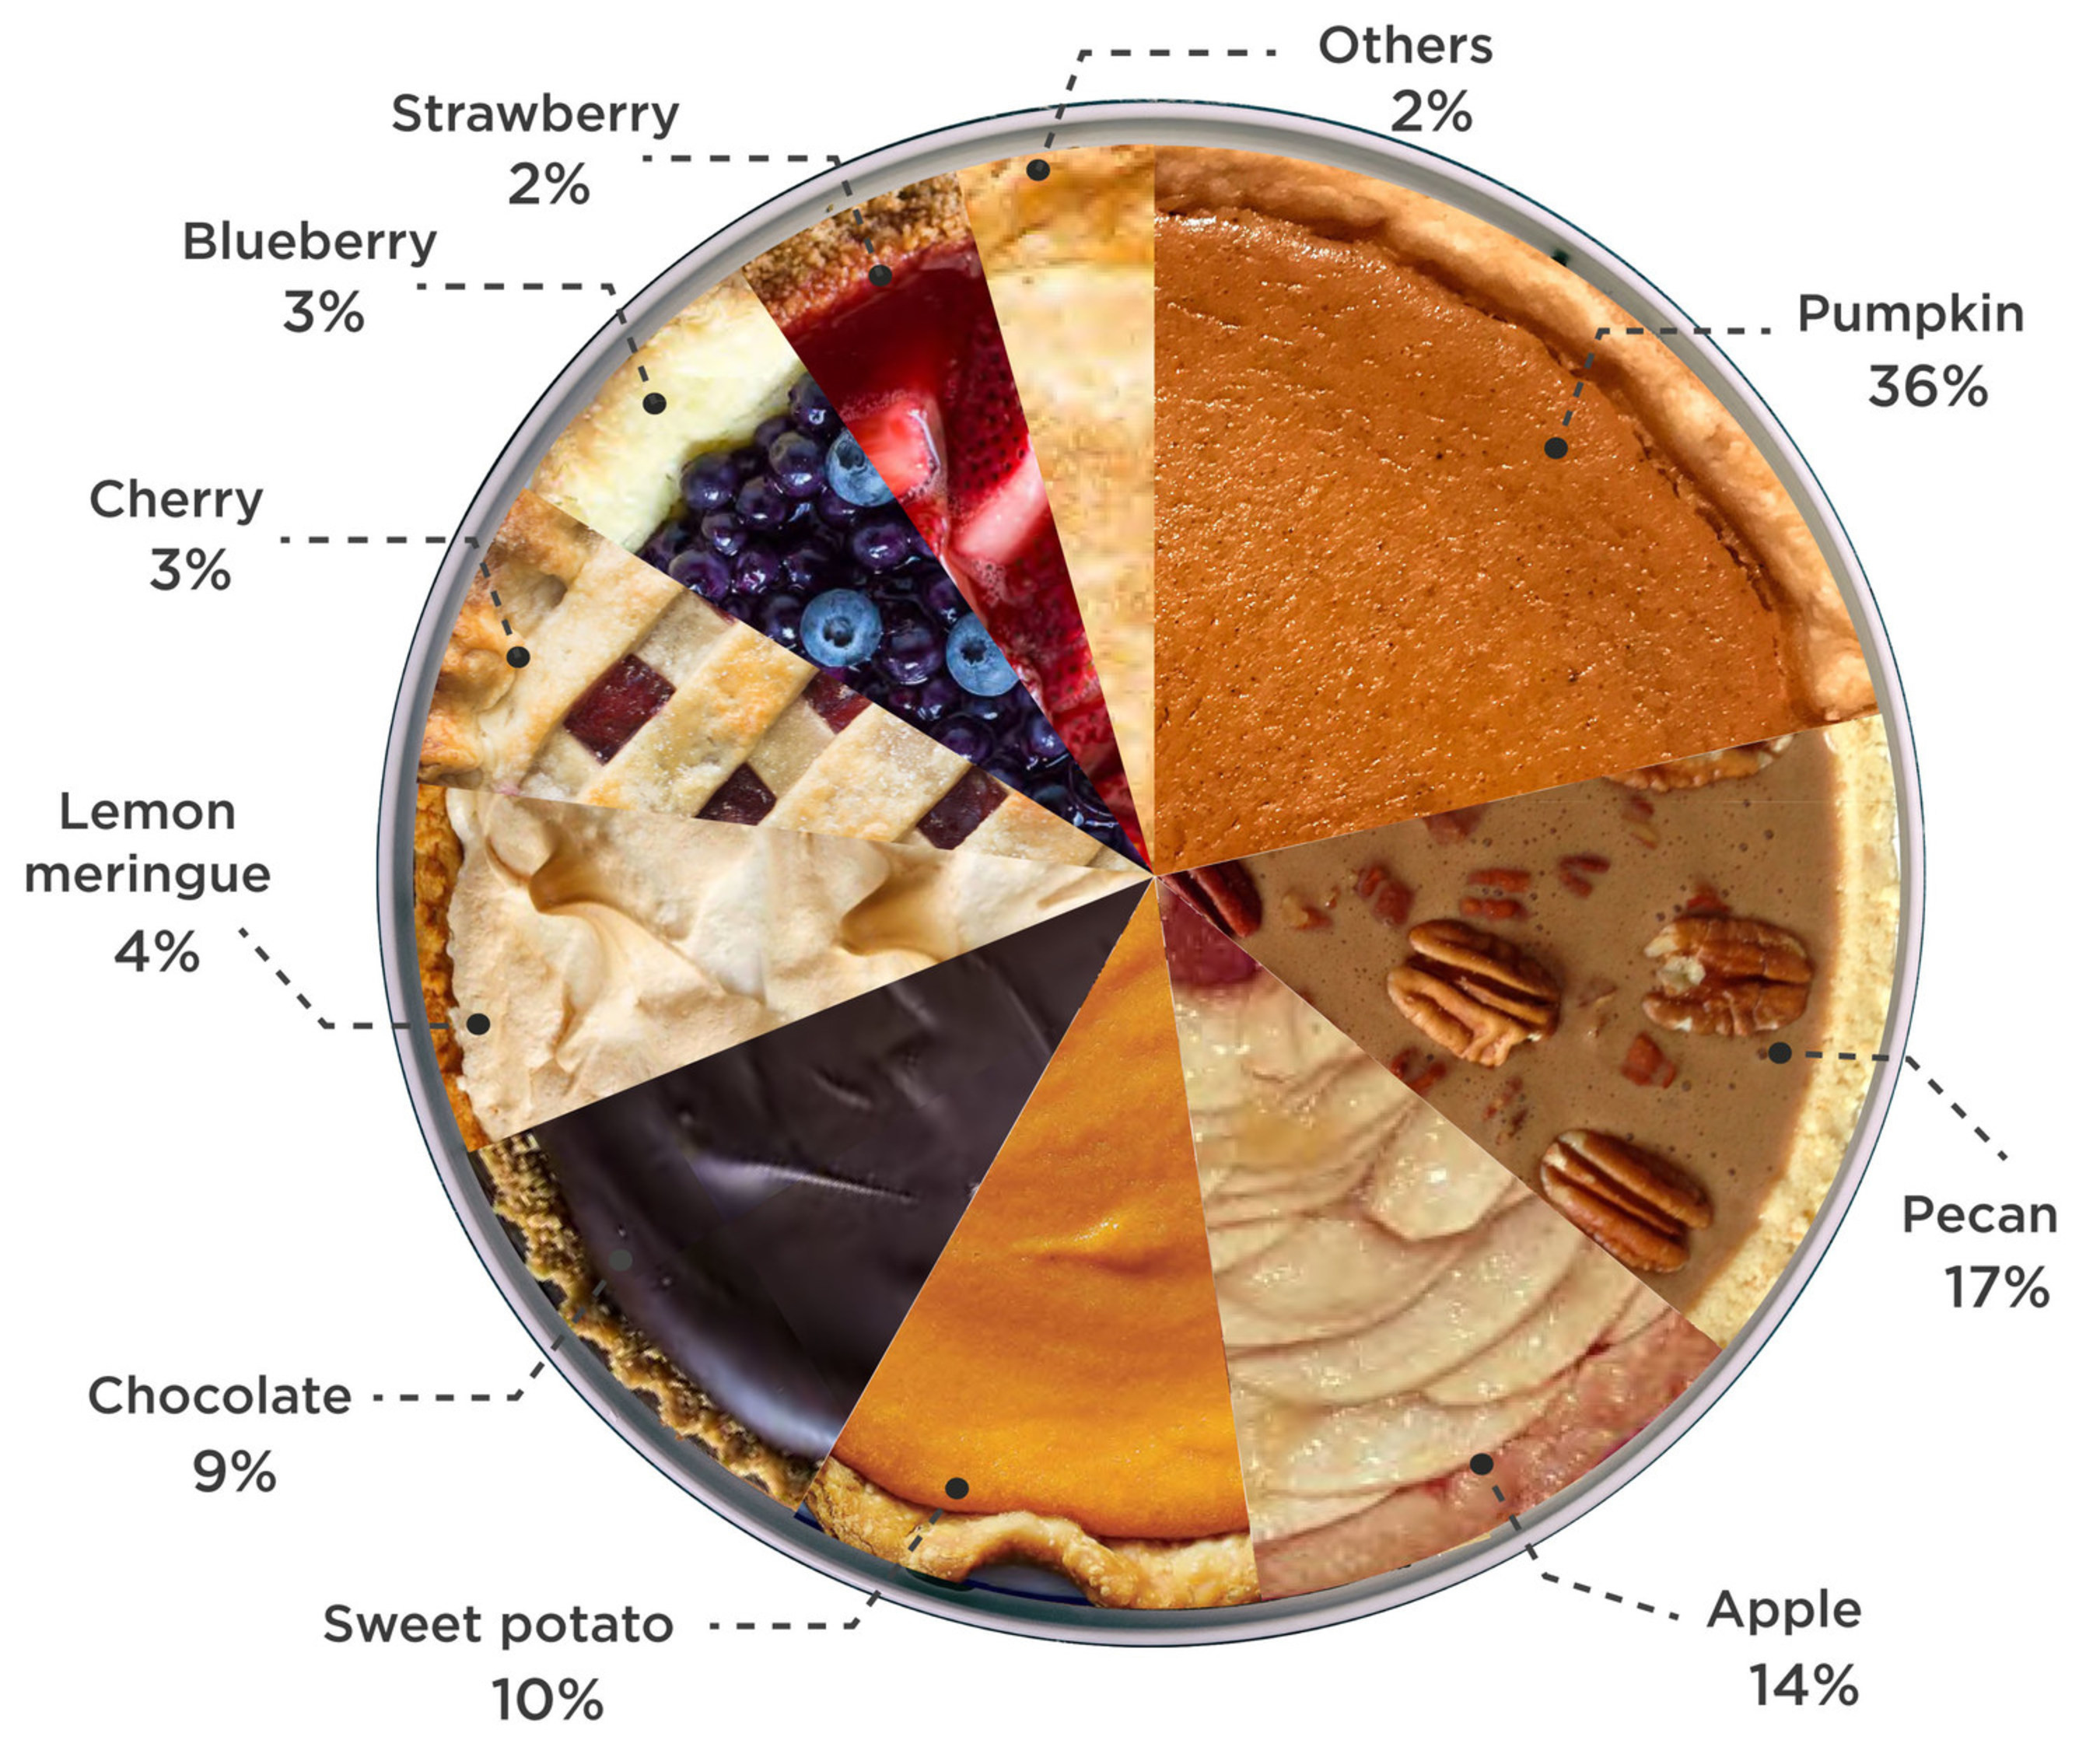 Most Popular Thanksgiving Pies
 What’s the most popular Thanksgiving pie served at the feast